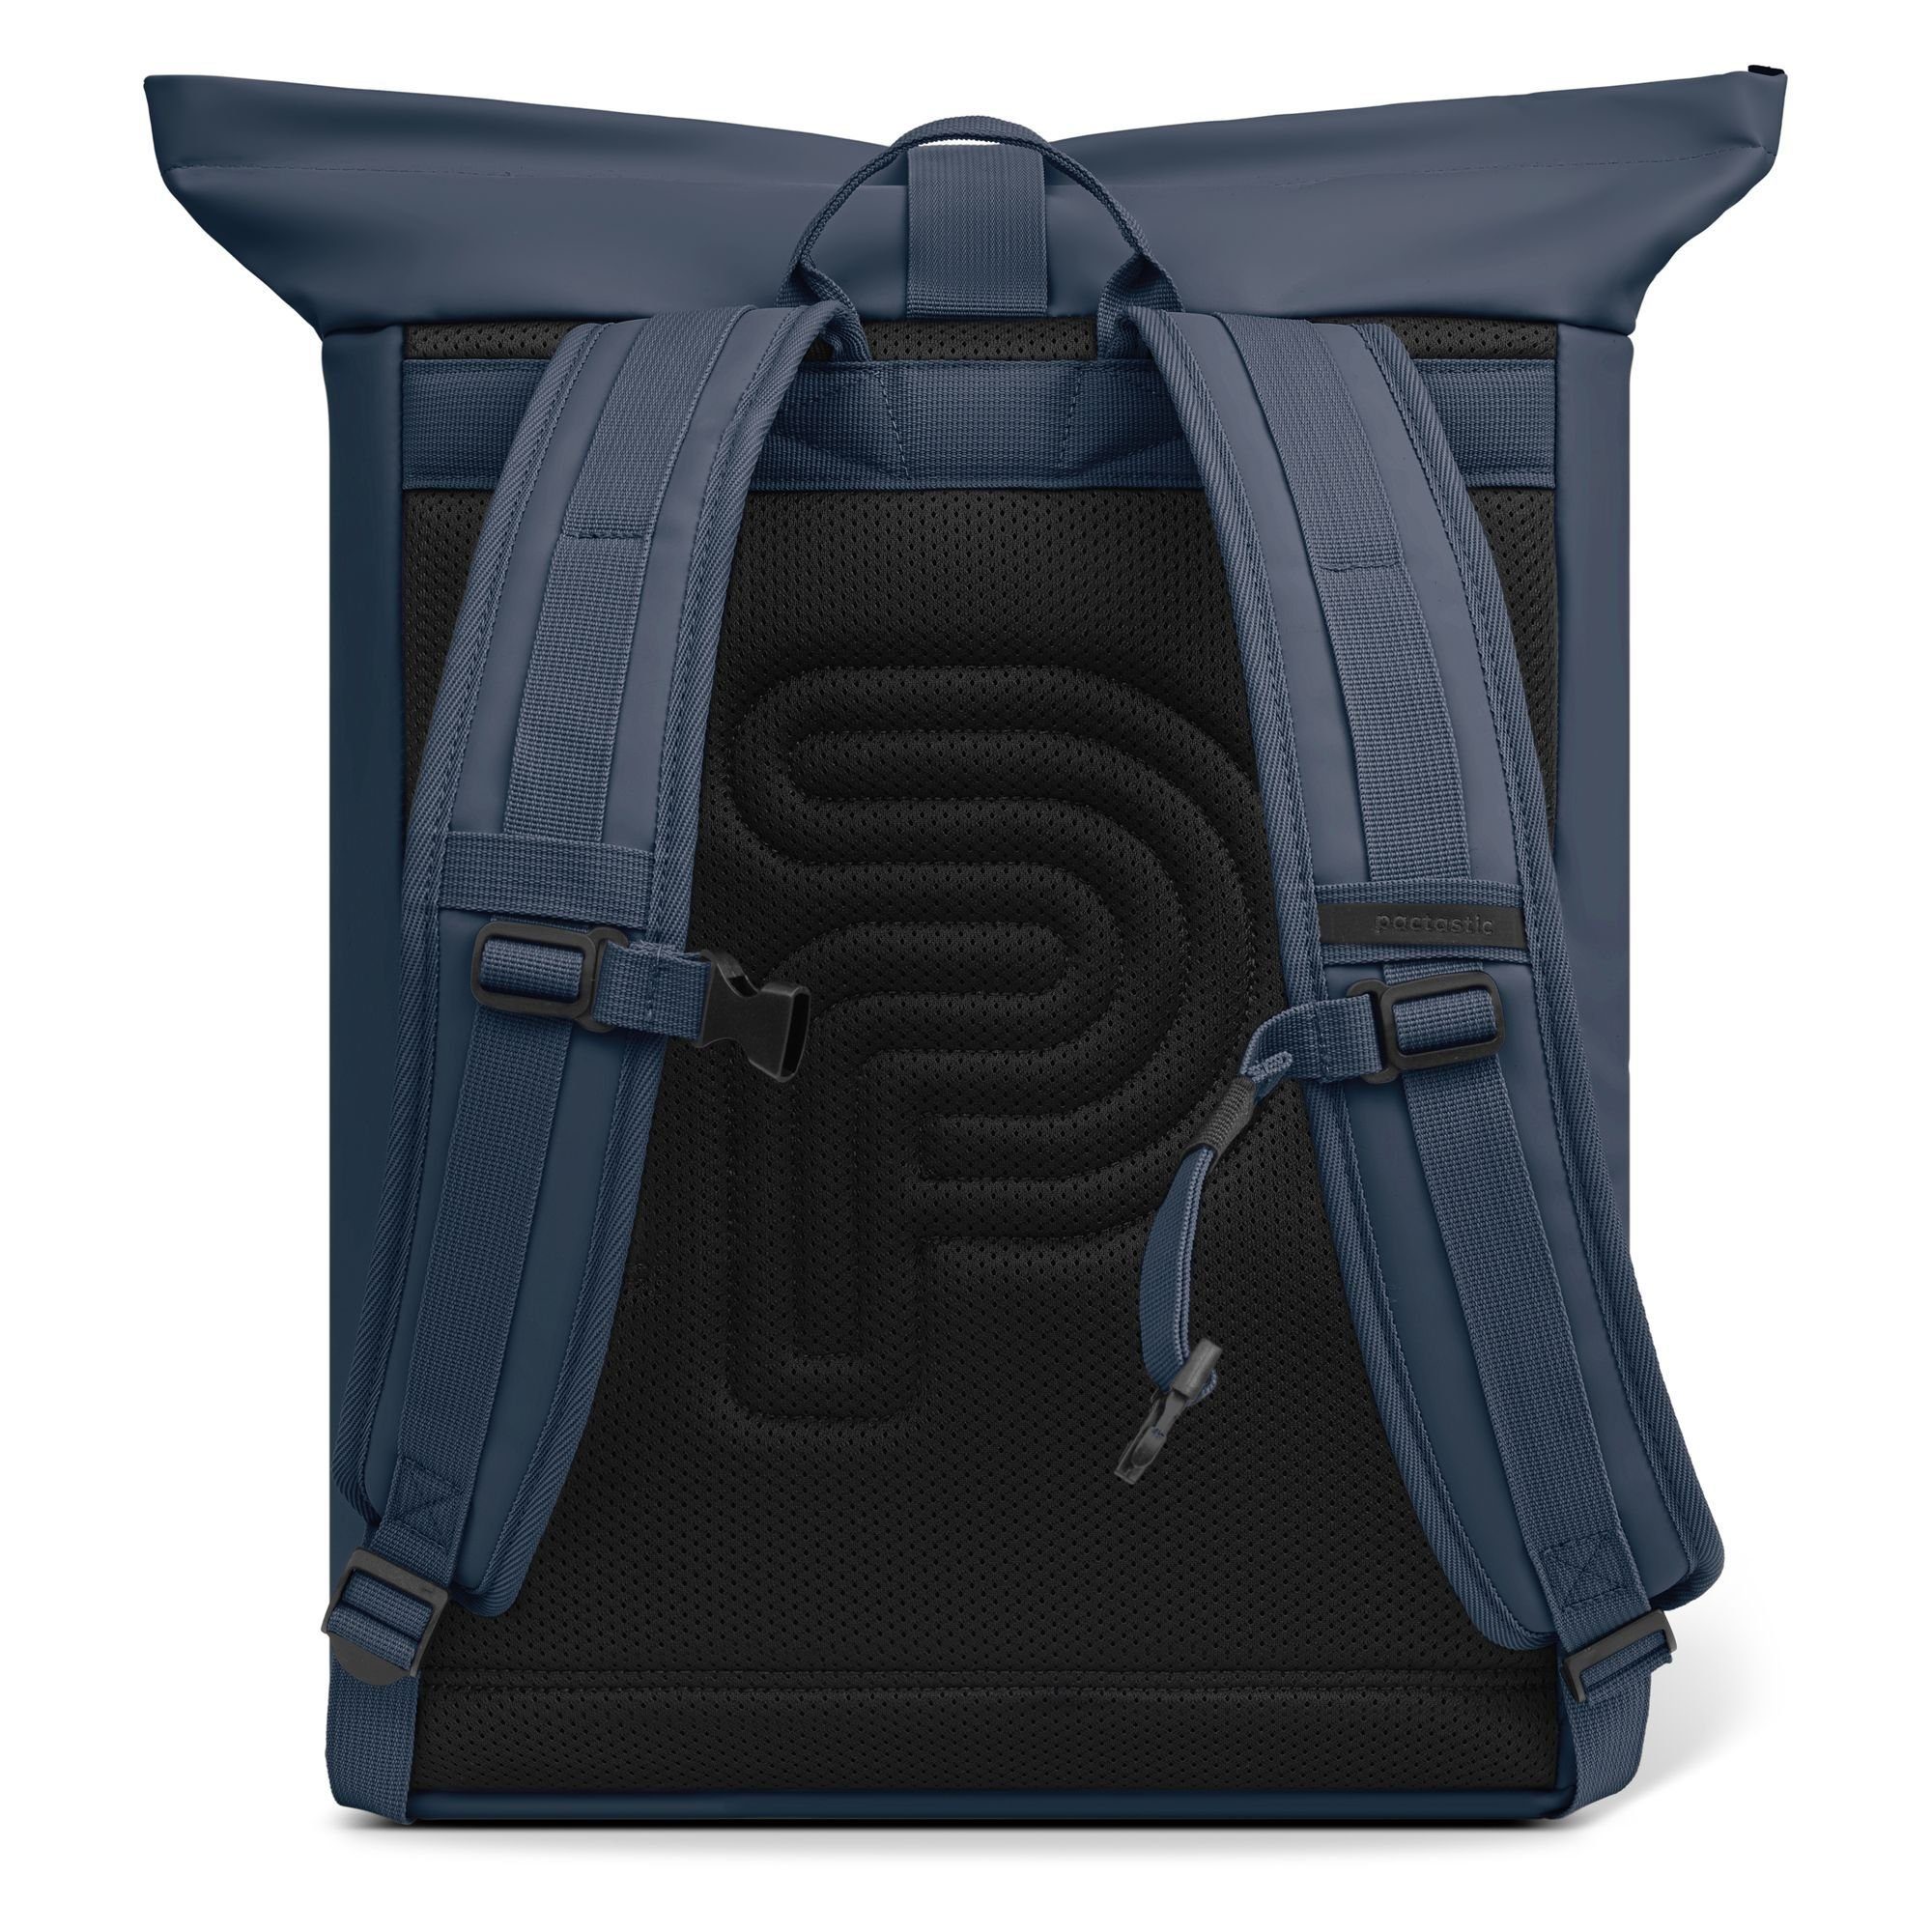 Pactastic blue Veganes Urban dark Tech-Material Daypack Collection,